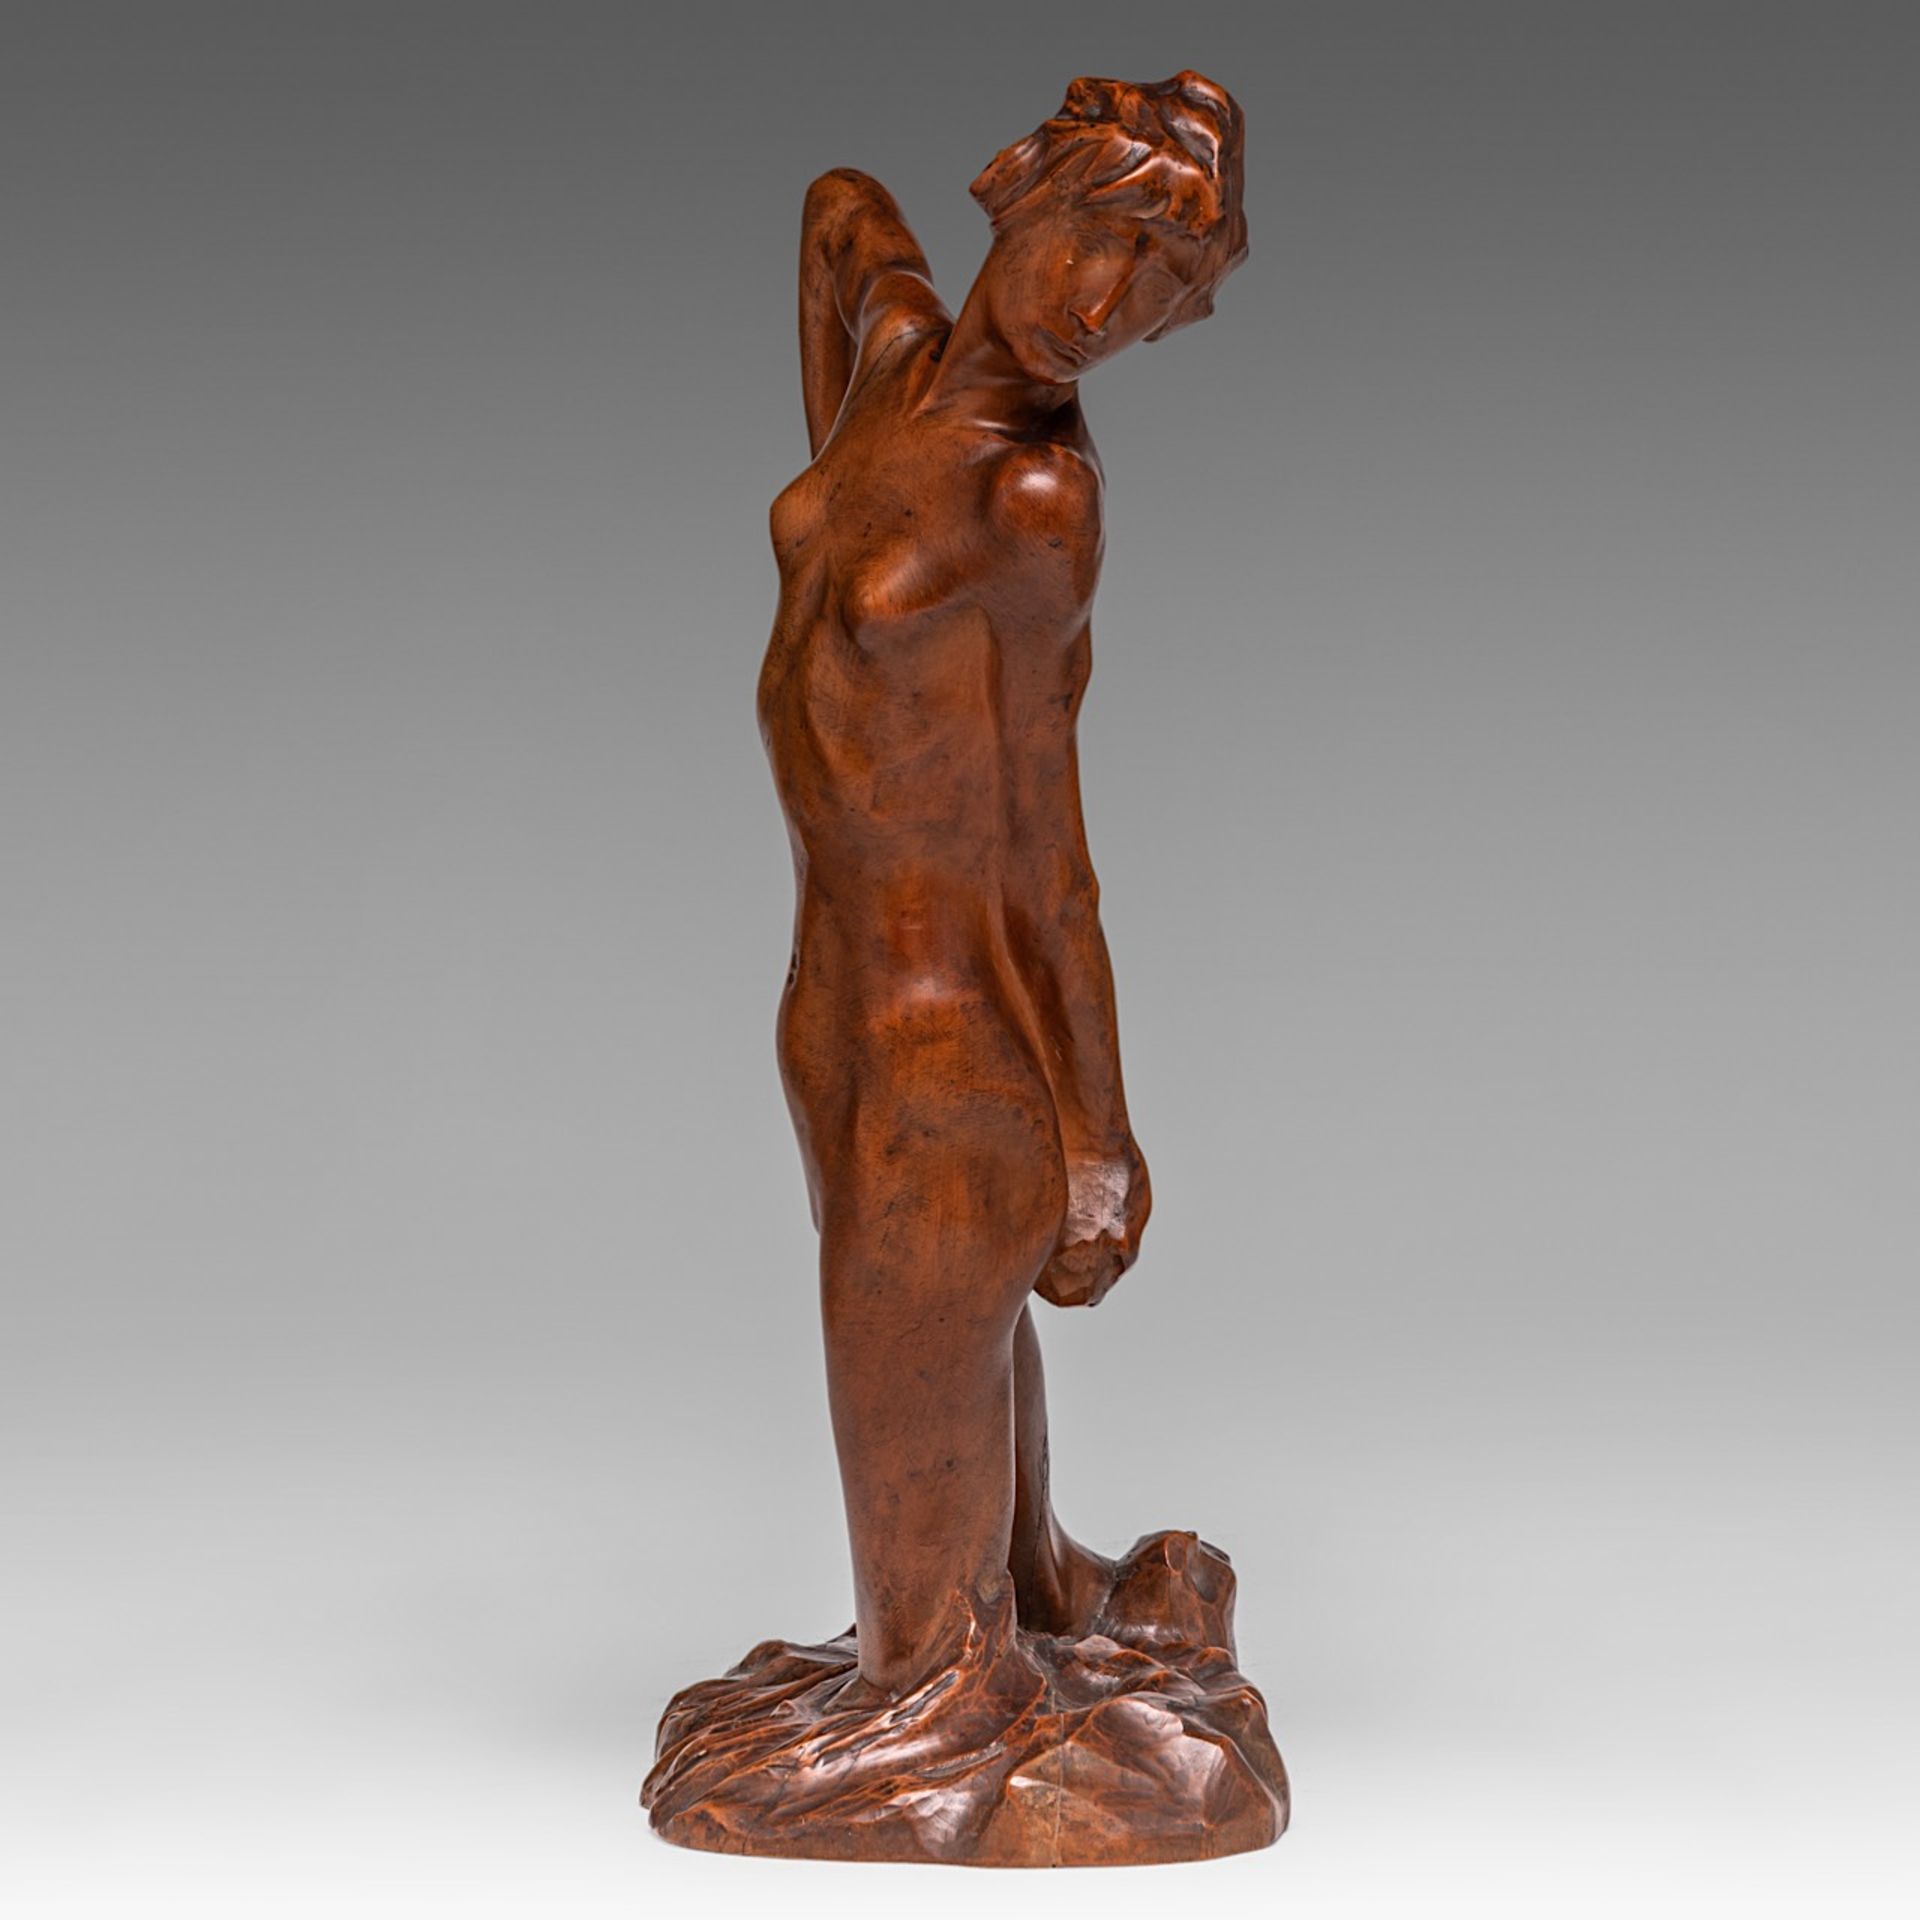 George Minne (1866-1941), 'Baigneuse I', carved wood, H 40 cm - Image 3 of 10